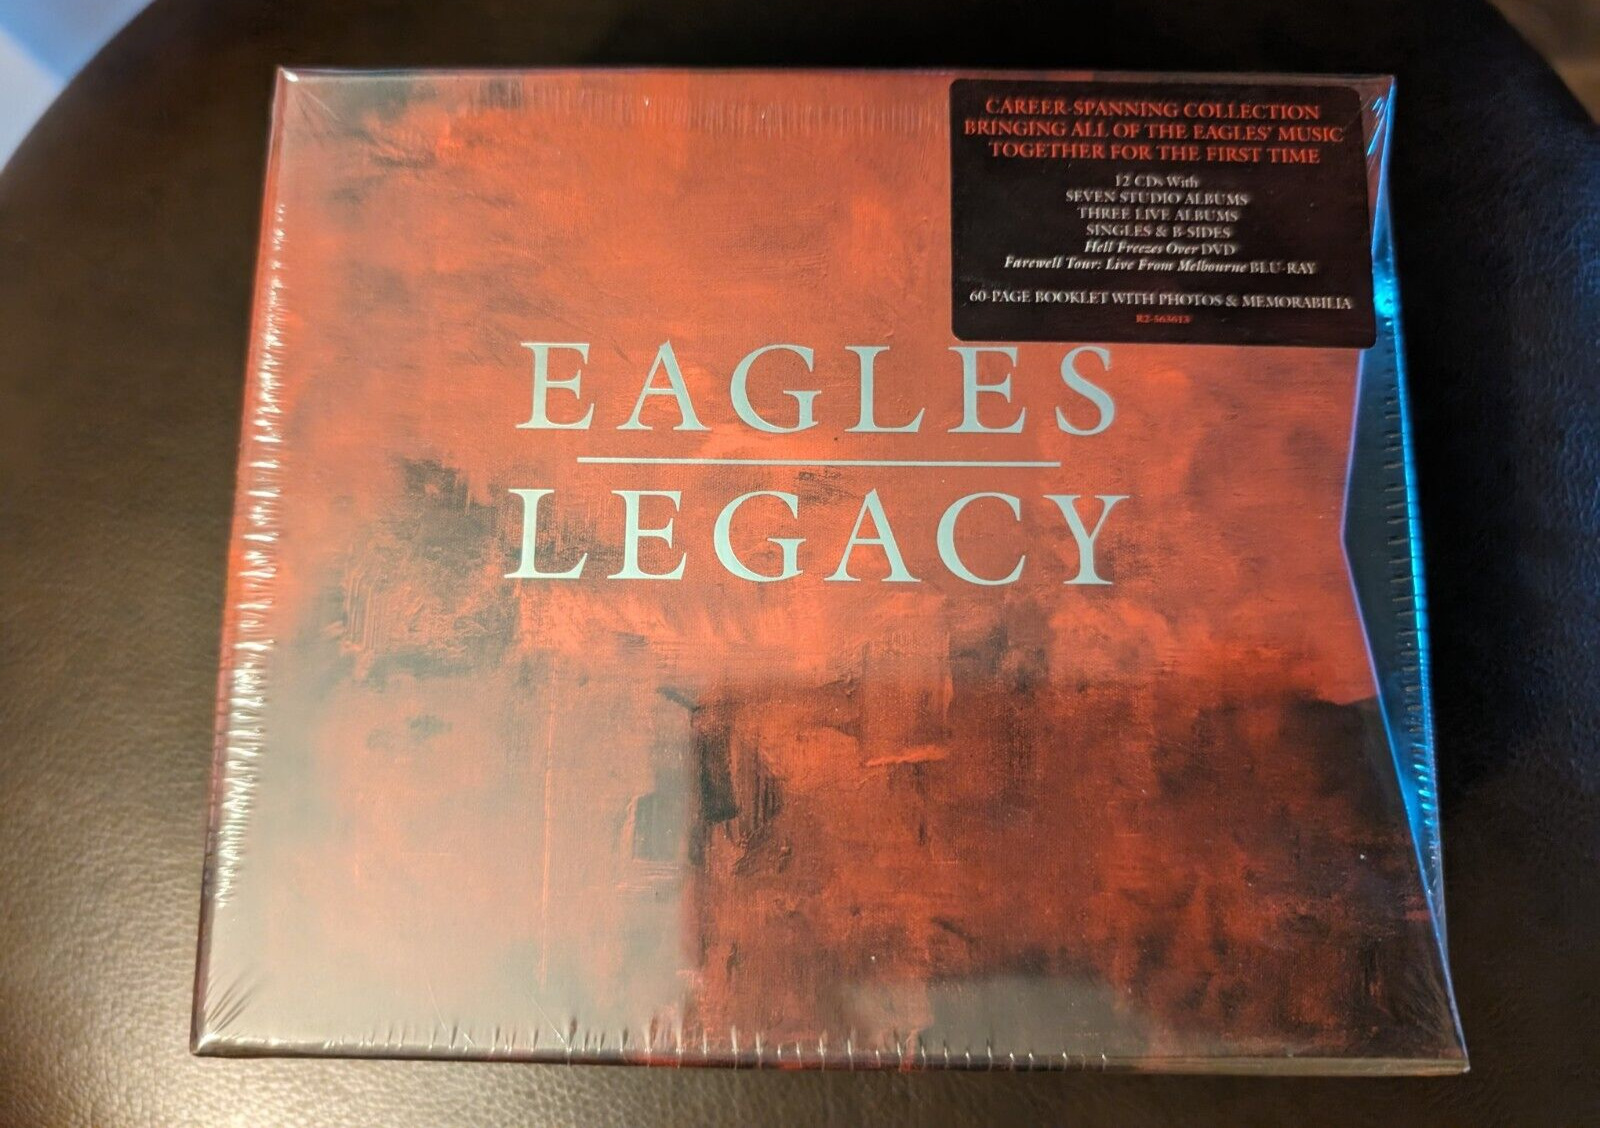 The Eagles - Legacy CD Deluxe Box Set - SEALED NEW